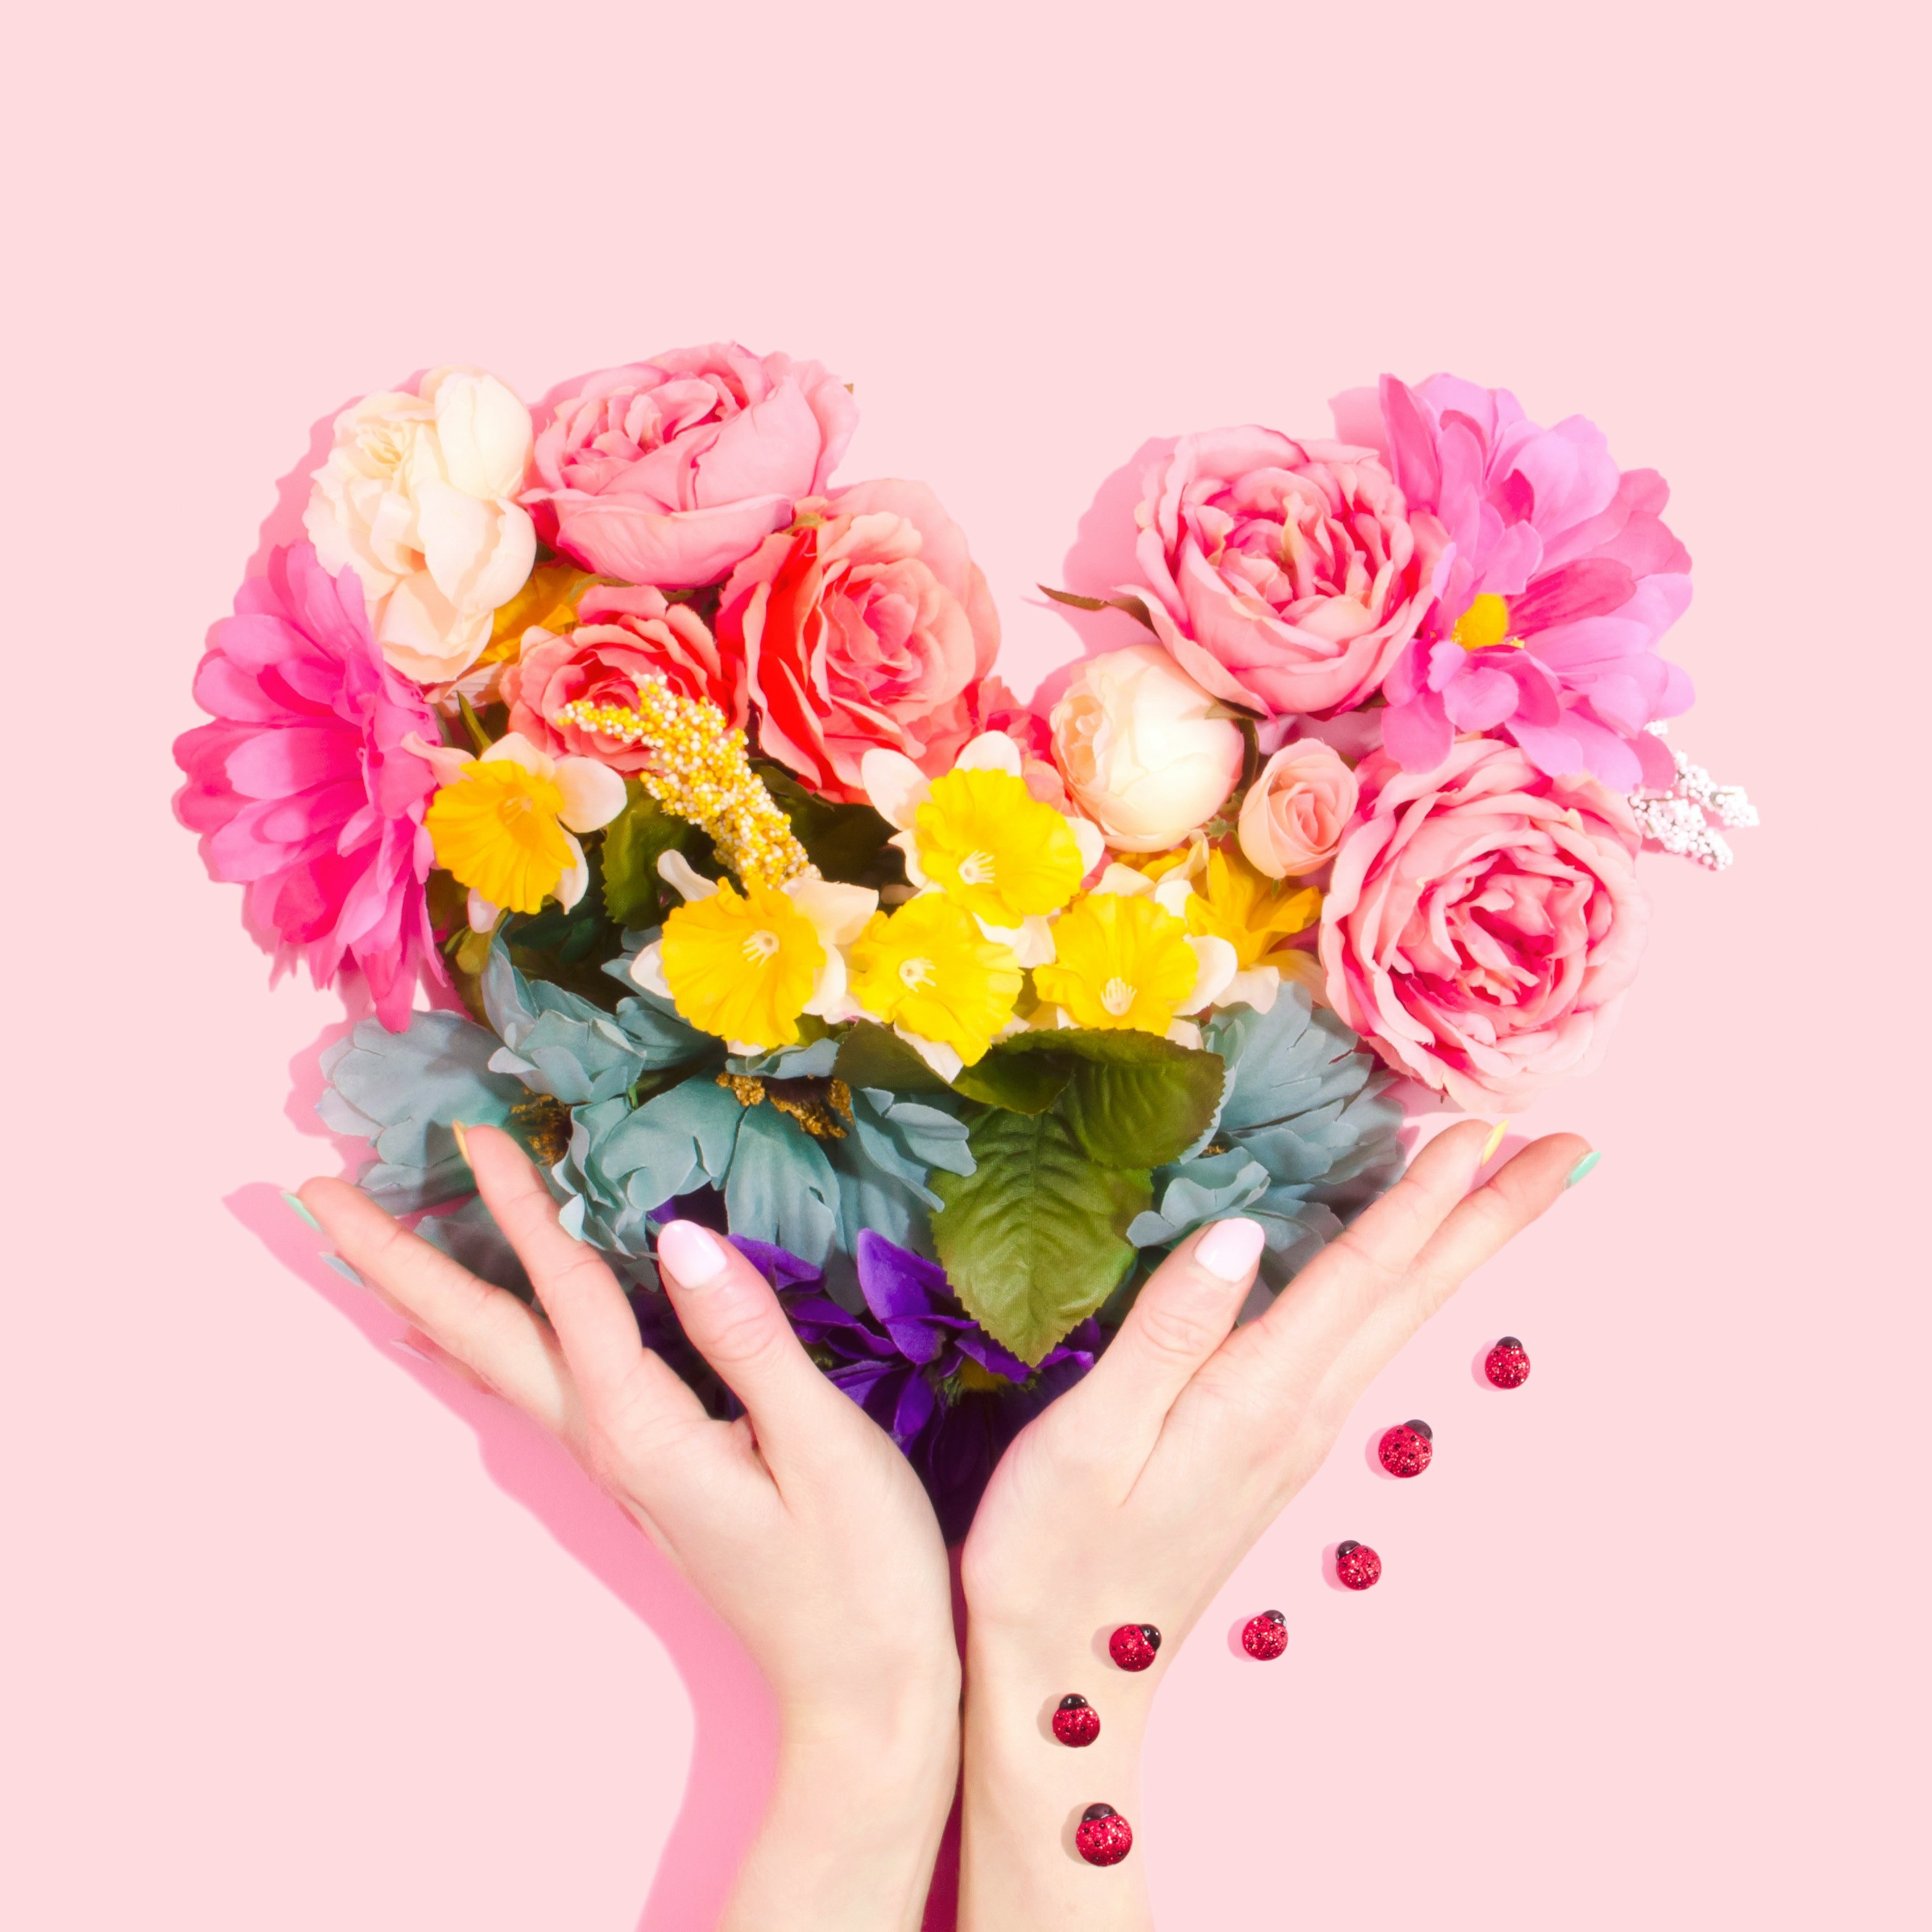 Bouquet of flowers in a heart shape representing Valentine's Day self-love and confidence